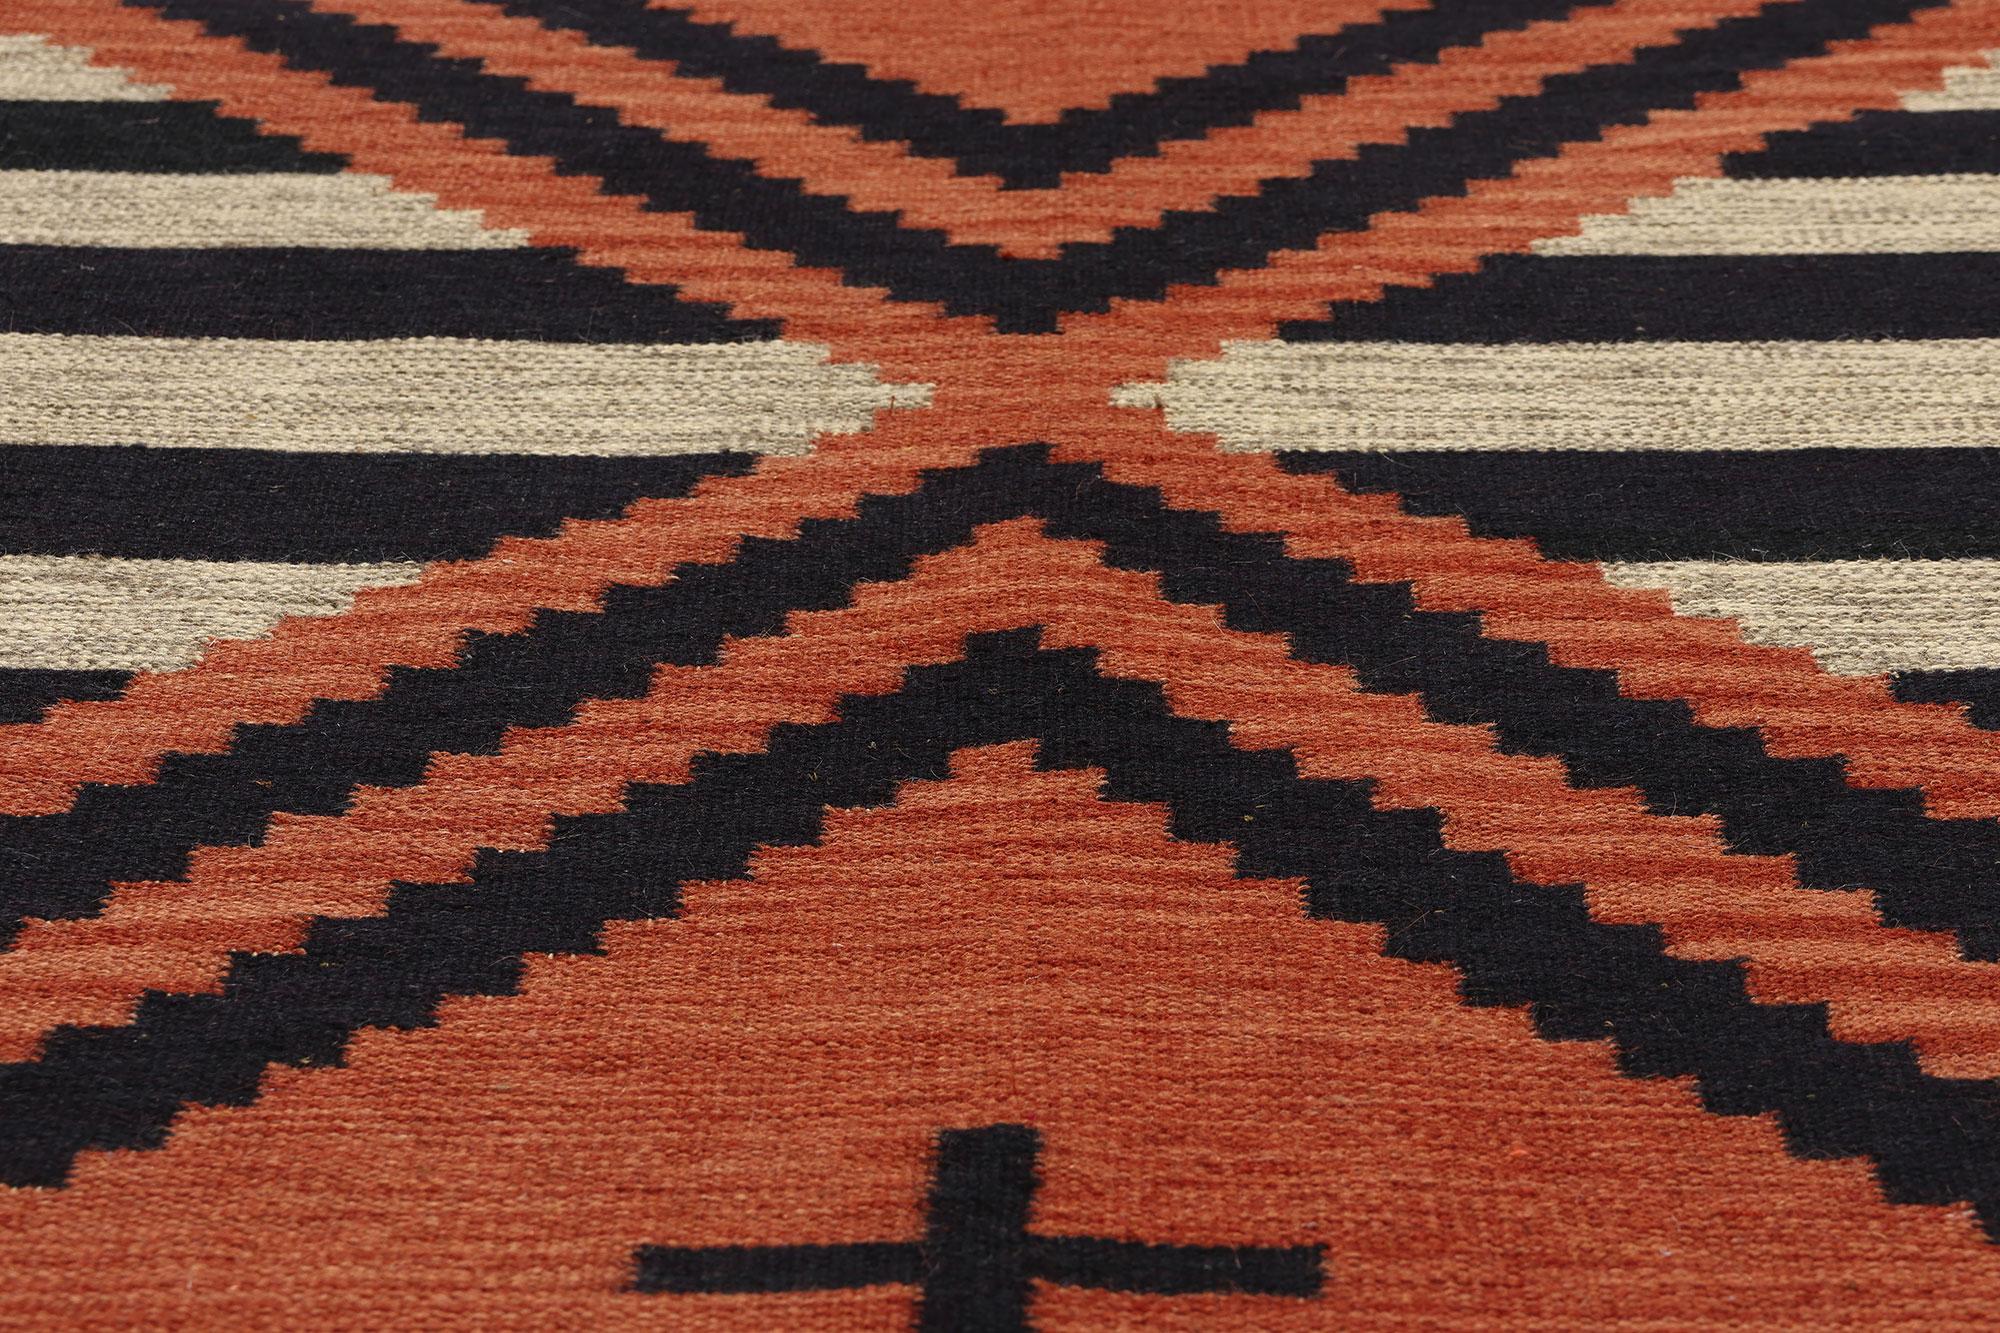 Contemporary Santa Fe Southwest Modern Chief Blanket Navajo-Style Rug  In New Condition For Sale In Dallas, TX